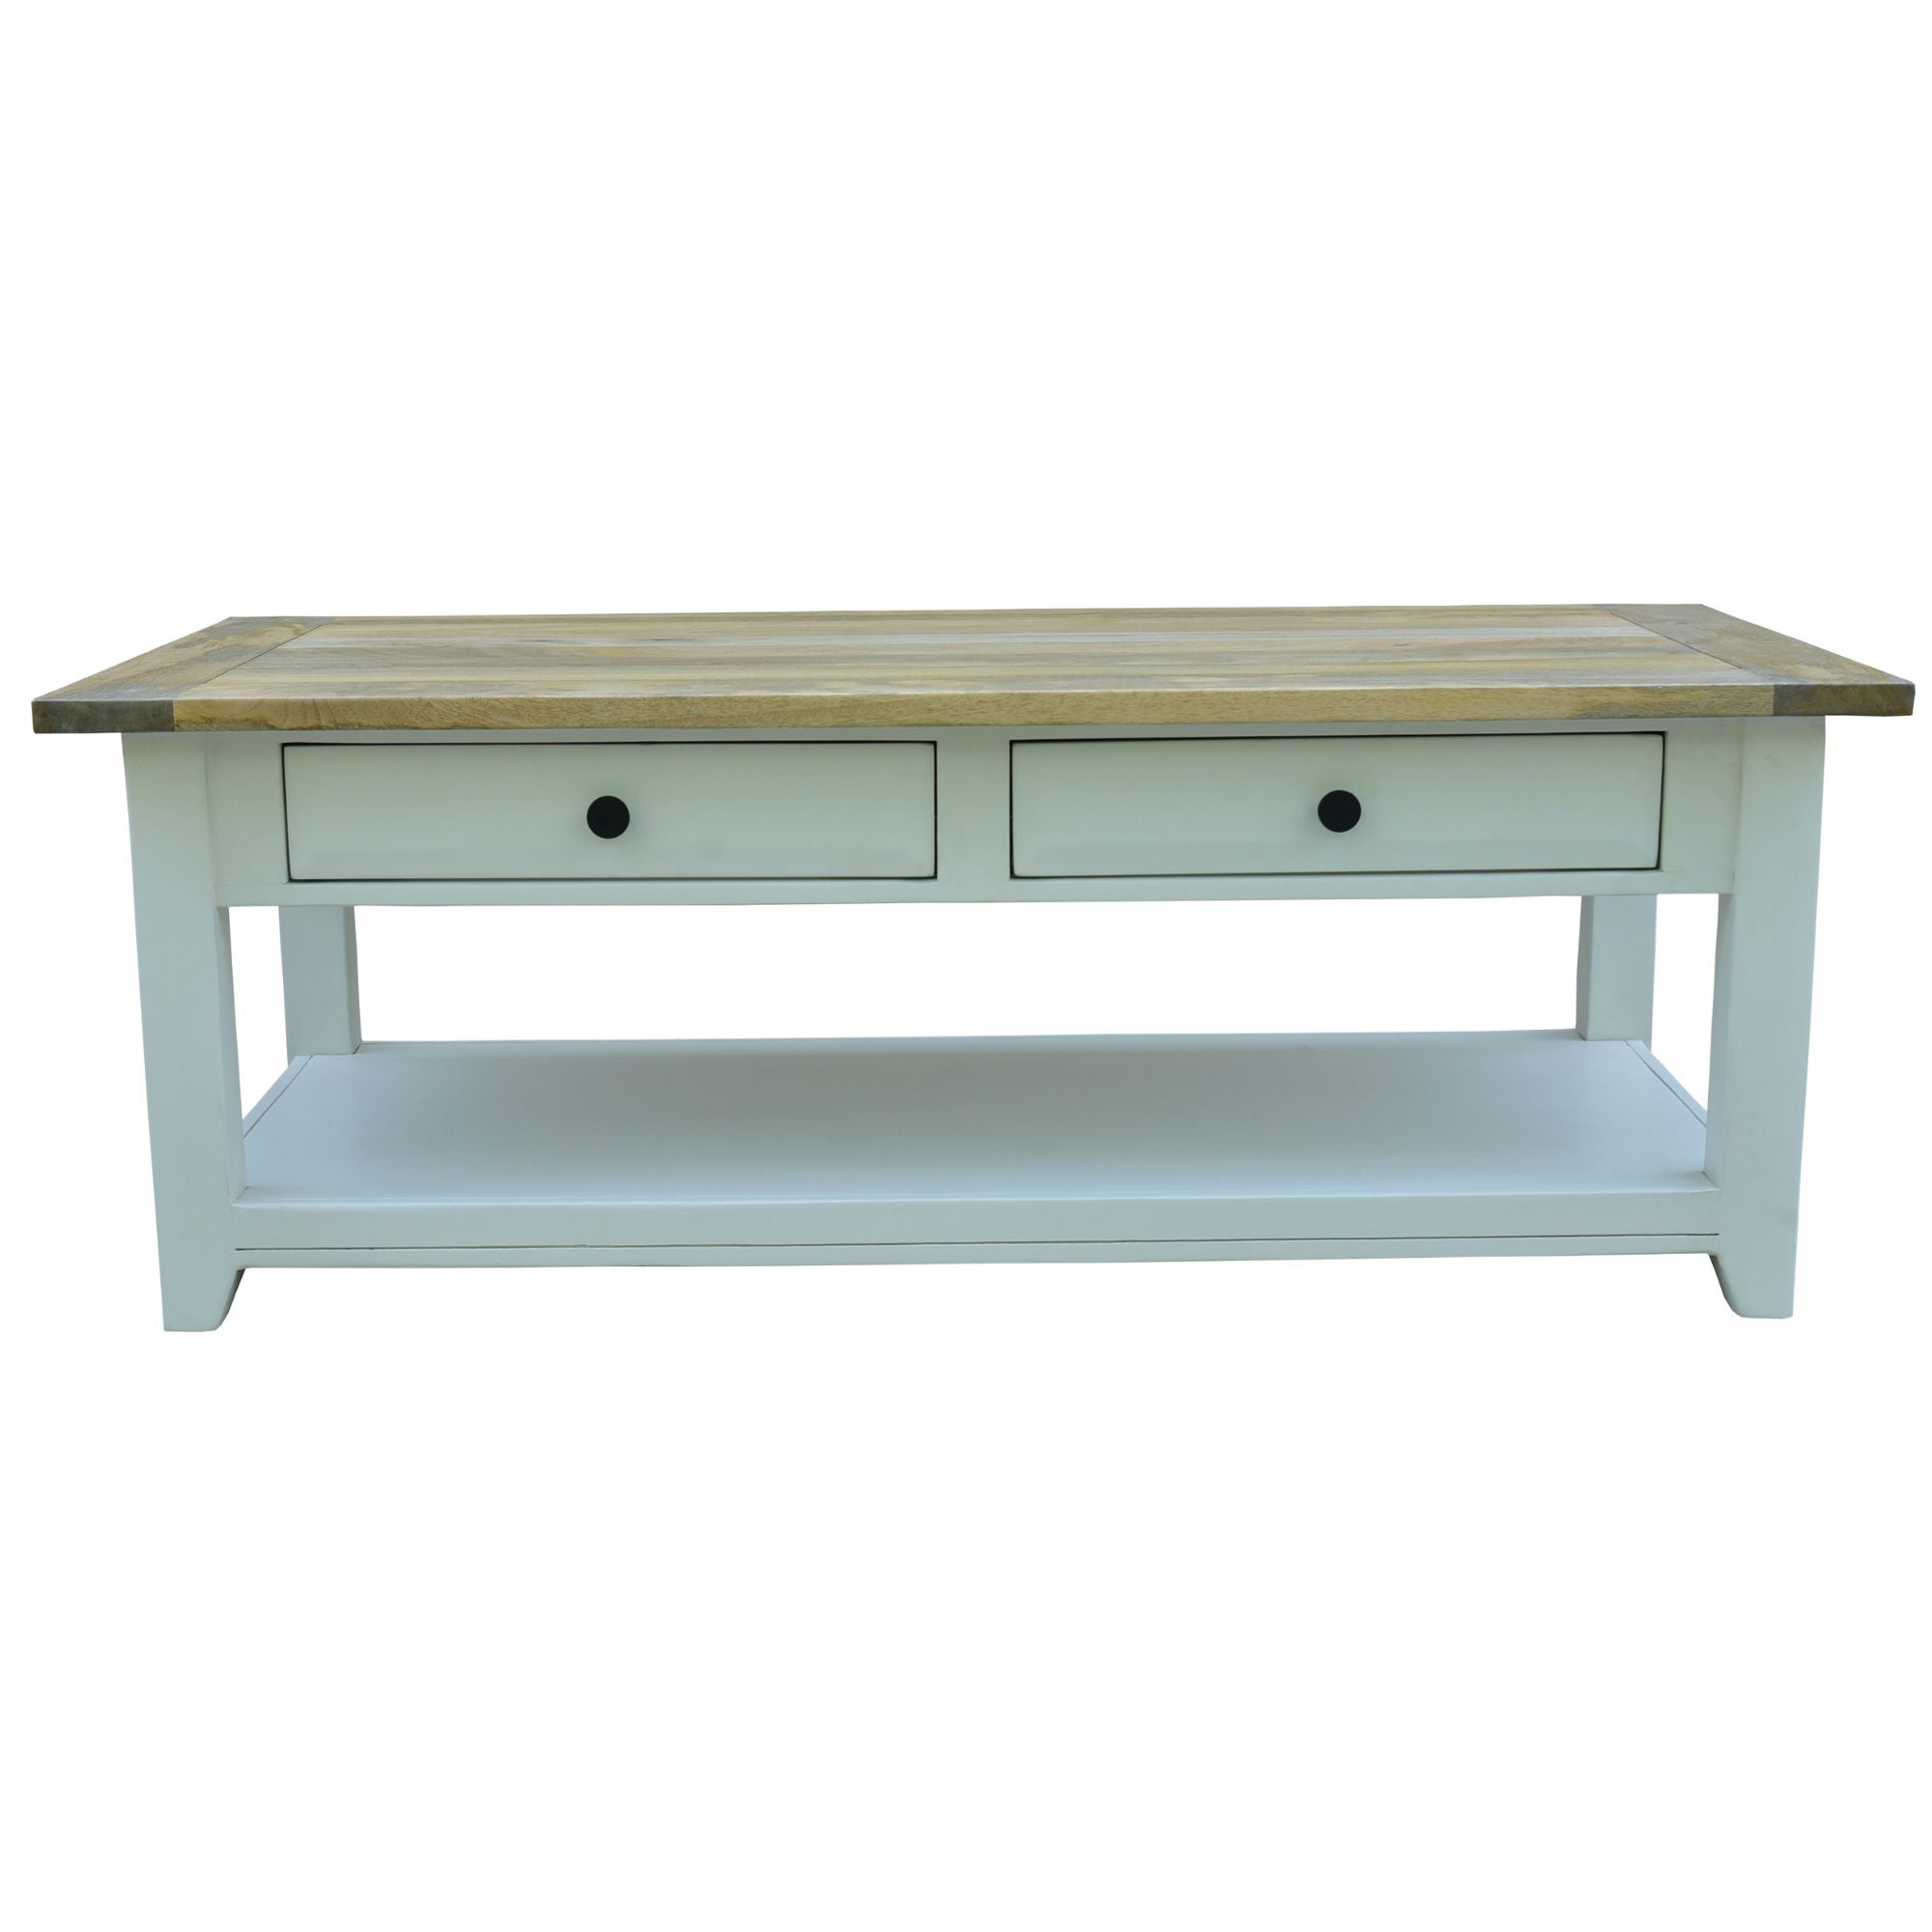 Lavasa Coffee Table with 4 Drawers Solid Mango Wood Modern - 130cm - Notbrand